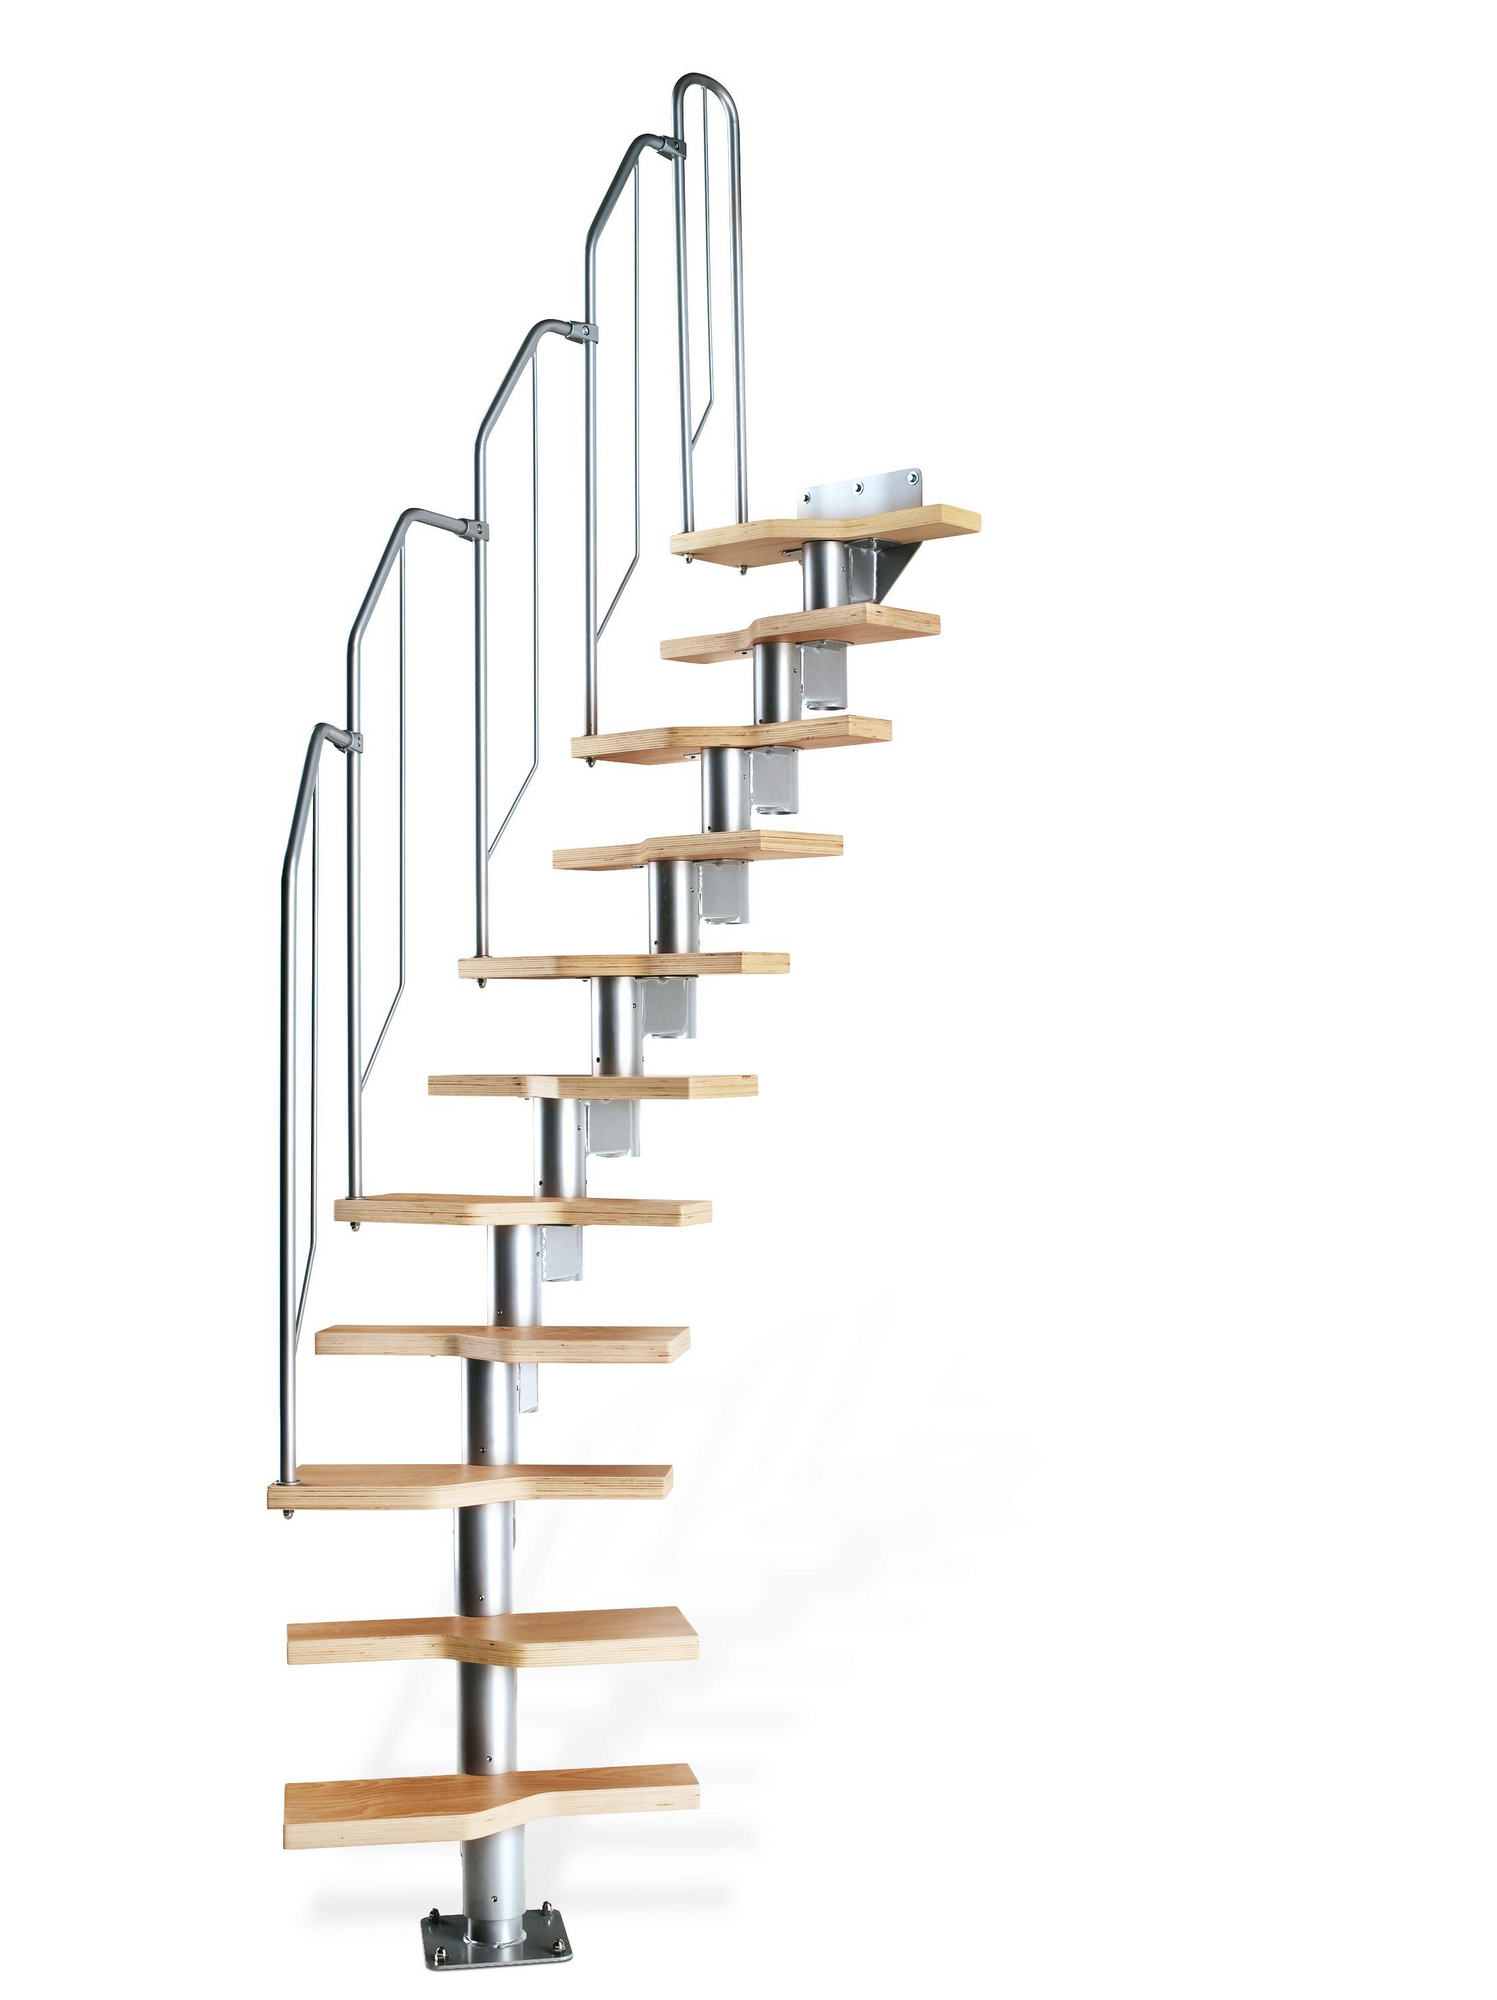 Mittelholmtreppe "Epe" + product picture